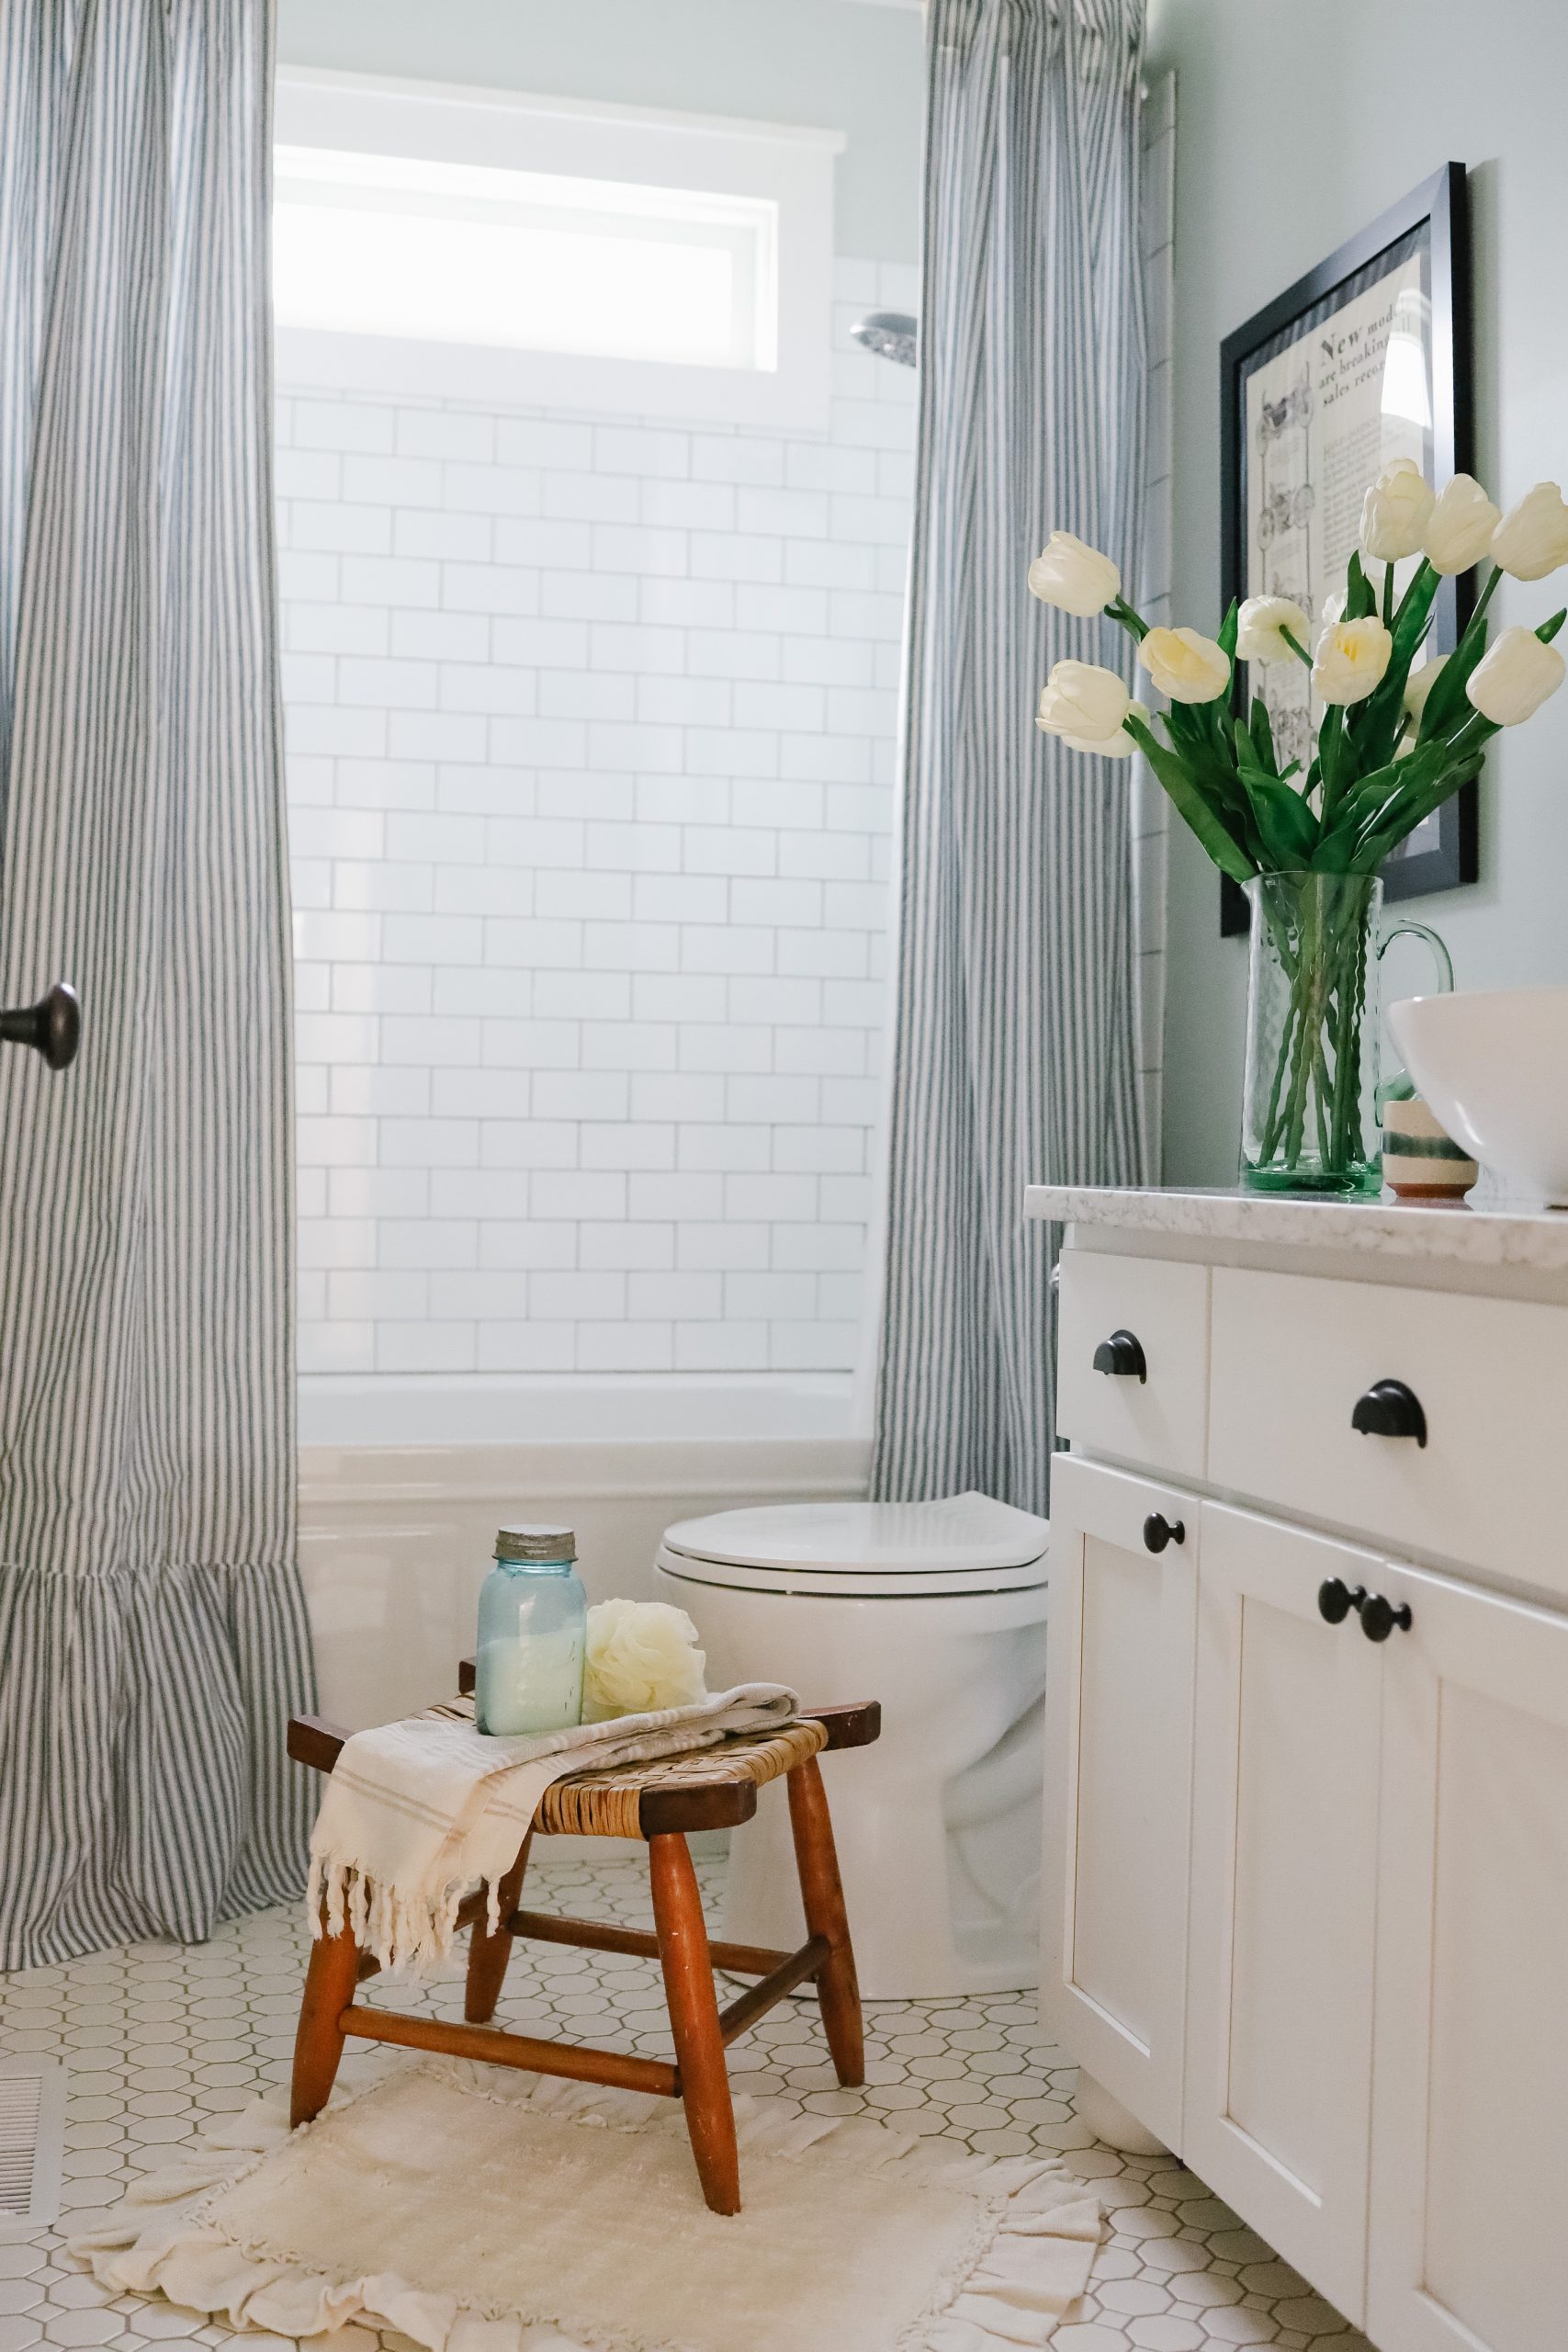 Shower Curtain Ideas: cost-effective ways to upgrade bathrooms